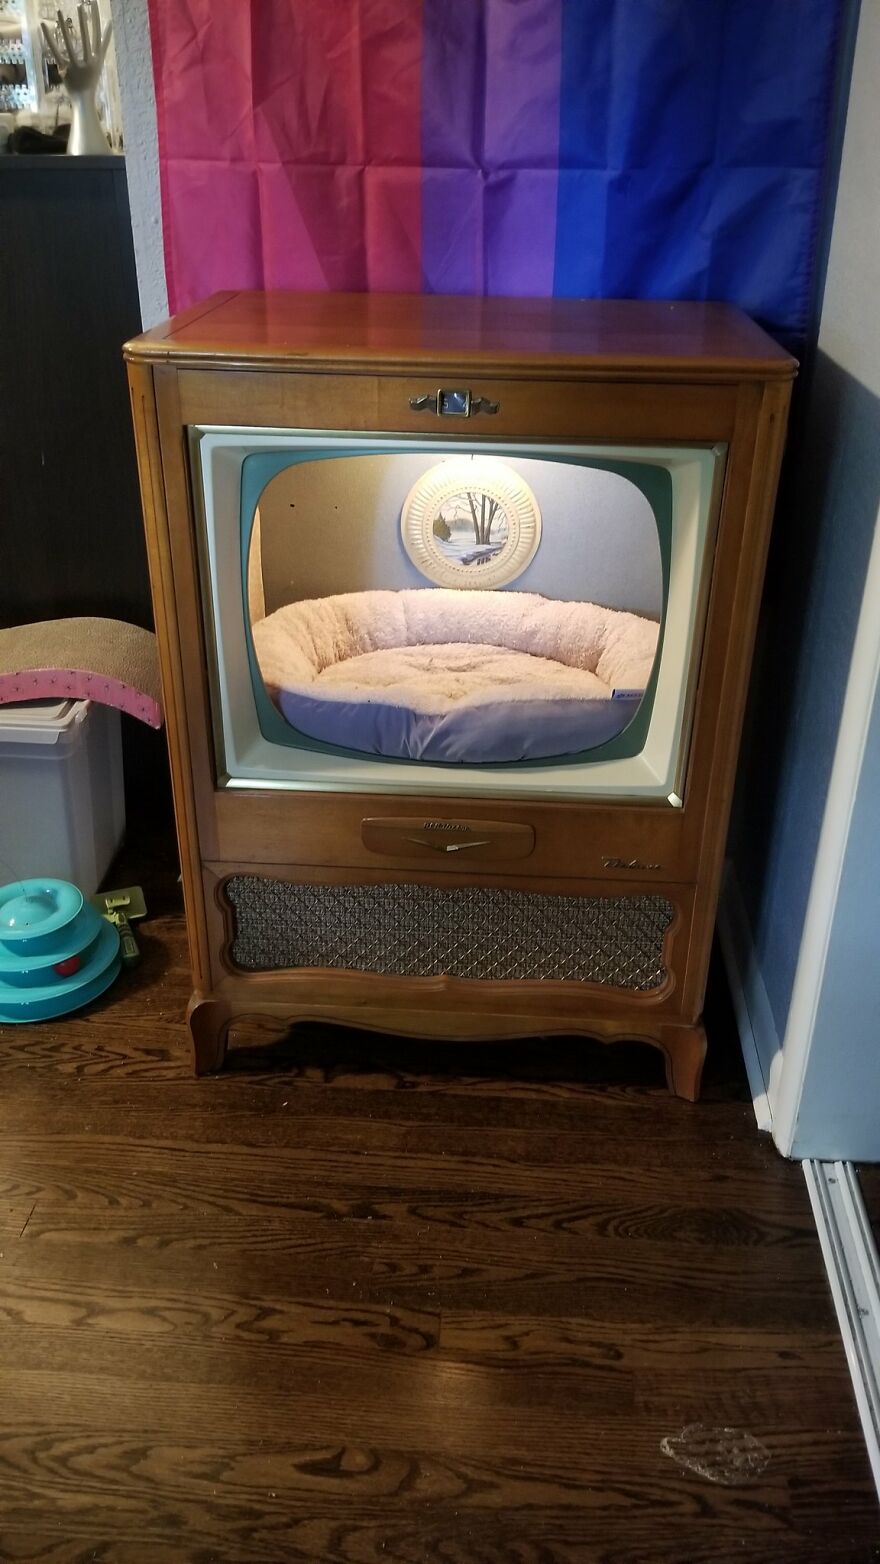 Dad Makes A Cat Bed For His Daughter's Feline From An Old TV, And It Hasn't Gone Unnoticed On The Socials